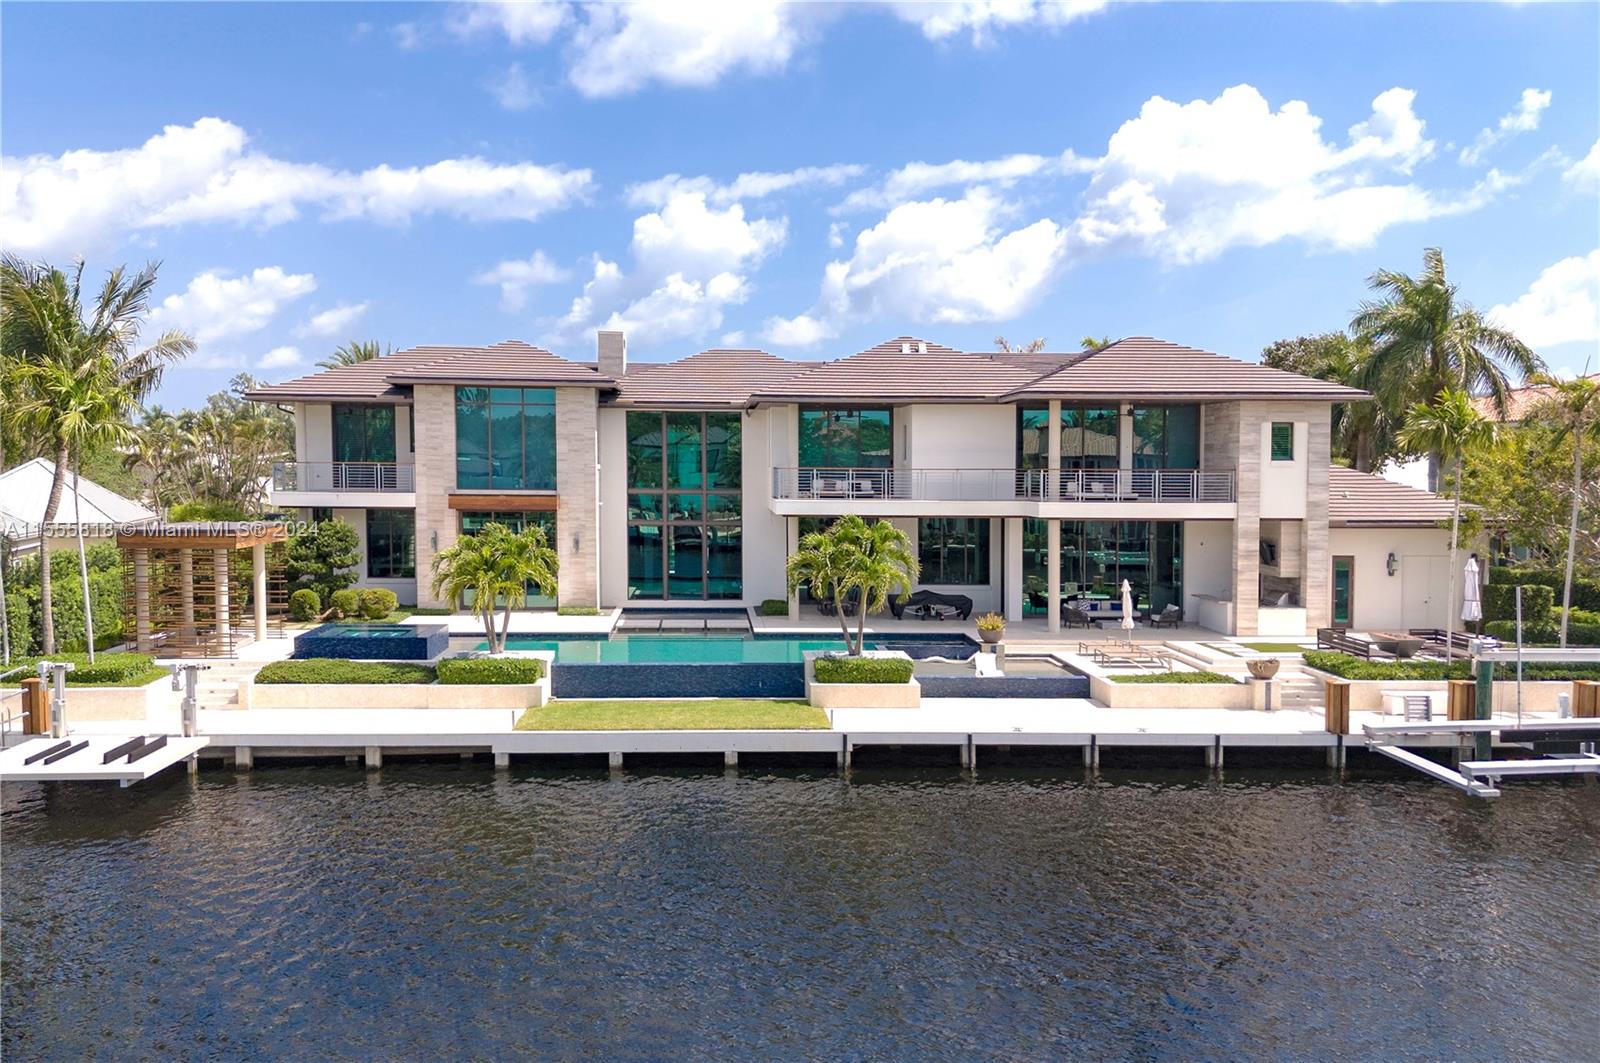 Discover this exclusive luxury waterfront estate in Bay Colony, Ft Lauderdale, designed by renowned Stofft Architects. Nestled within a gated, yachting,& 24/7 armed security community, it offers privacy and peace of mind, mins. from PineCrest School, one of the nation's premier private schools. Enjoy 160' of water frontage seamlessly integrated with 21,135 sft land. Inside, find well-appointed spaces with upscale finishes and Gaggenau appliances, a grand foyer, volume ceilings, ensuite baths in all beds, covered balconies, private gym, theater, clubroom, wine cellar, oversized owner's suite, spa-like bath,chef's kitchen w a breakfast area. Outside, indulge in an infinity pool, gazebo, summer kitchen, fire pit, stone-finished dock, & many more features and details waiting to be discovered!